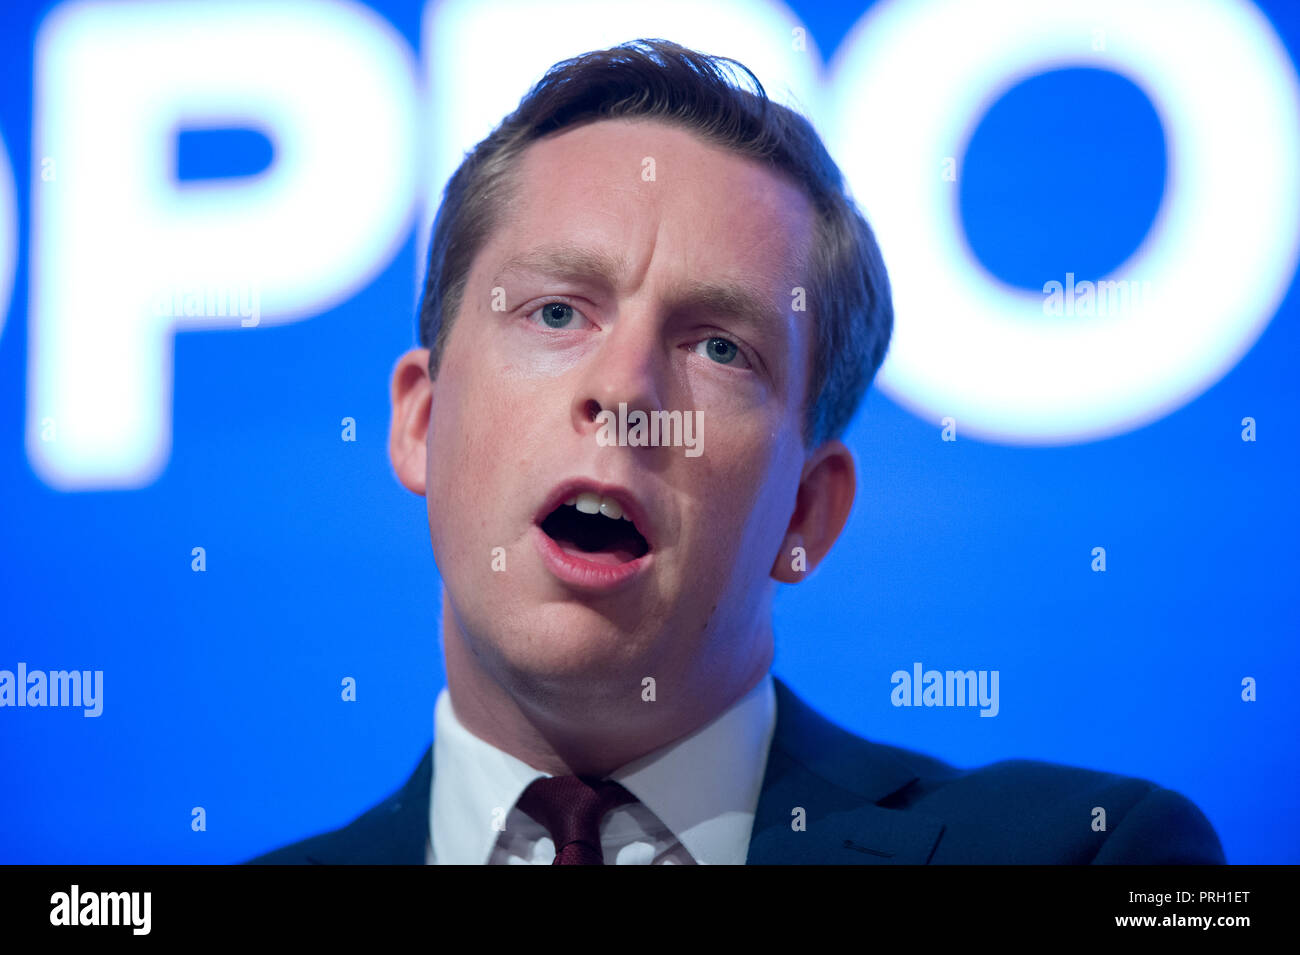 Birmingham, UK. 3rd October 2018. Tom Pursglove, Vice Chairman of the Conservative Party, speaks at the Conservative Party Conference in Birmingham. © Russell Hart/Alamy Live News. Stock Photo